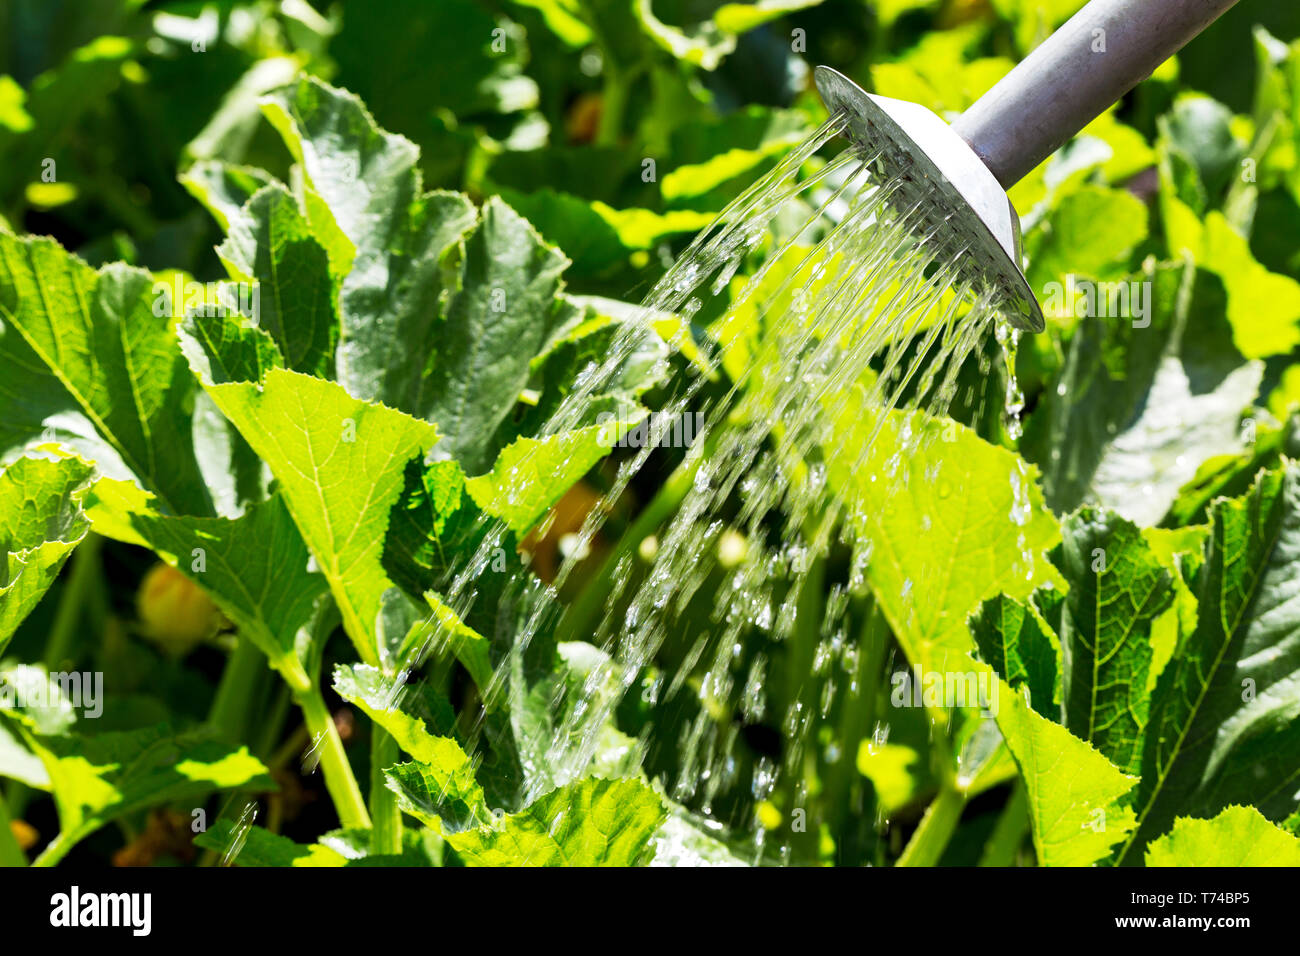 Close-up of a tin watering can watering green pea plants; Calgary, Alberta, Canada Stock Photo